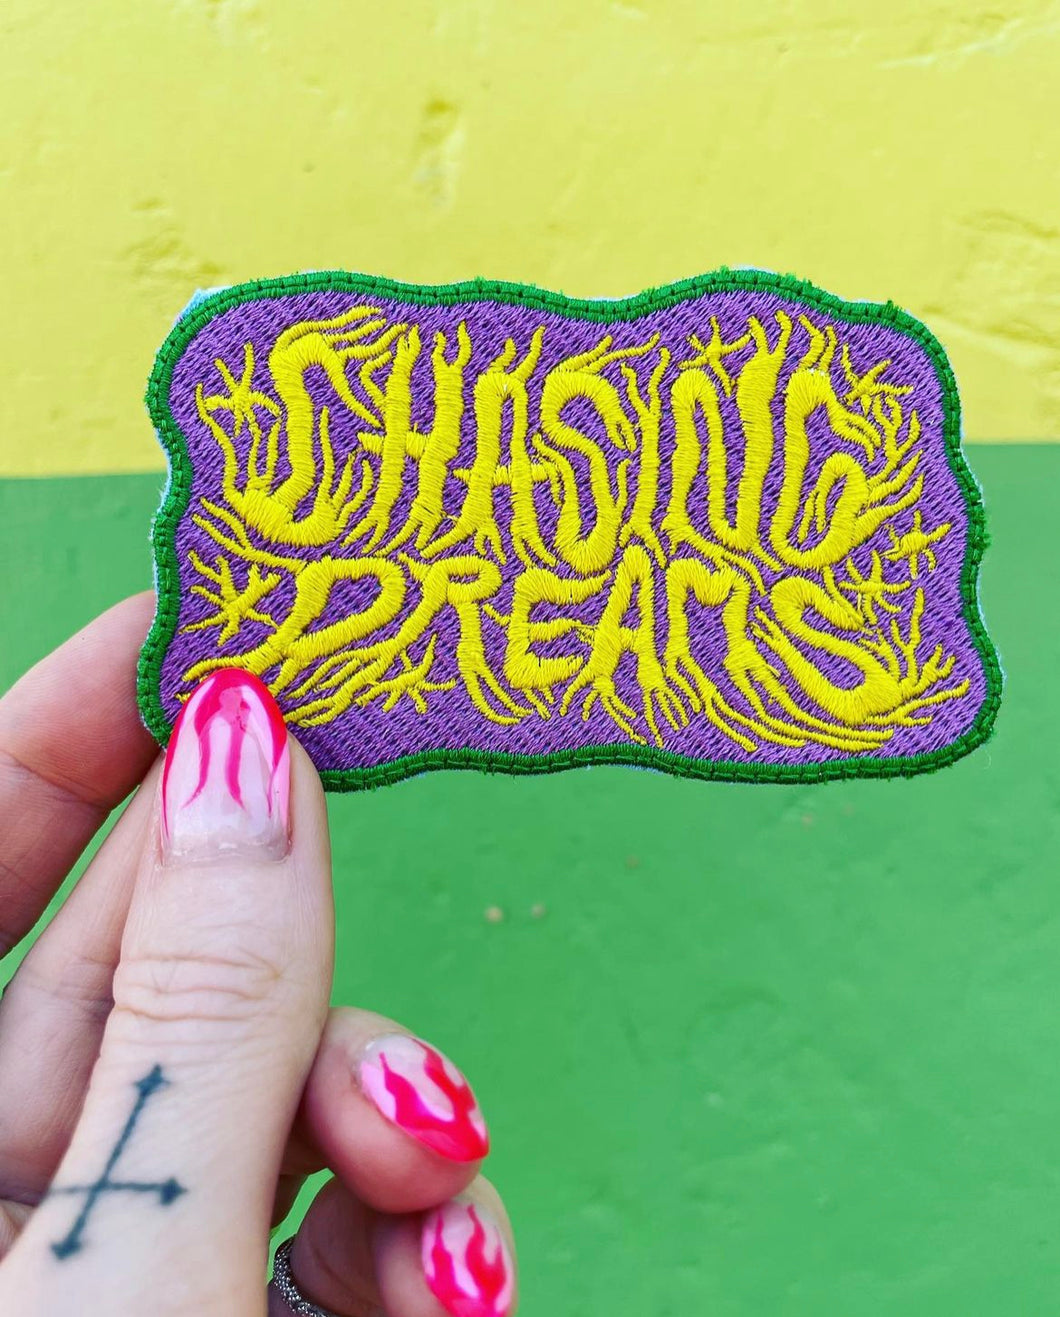 Chasing Dreams Patch